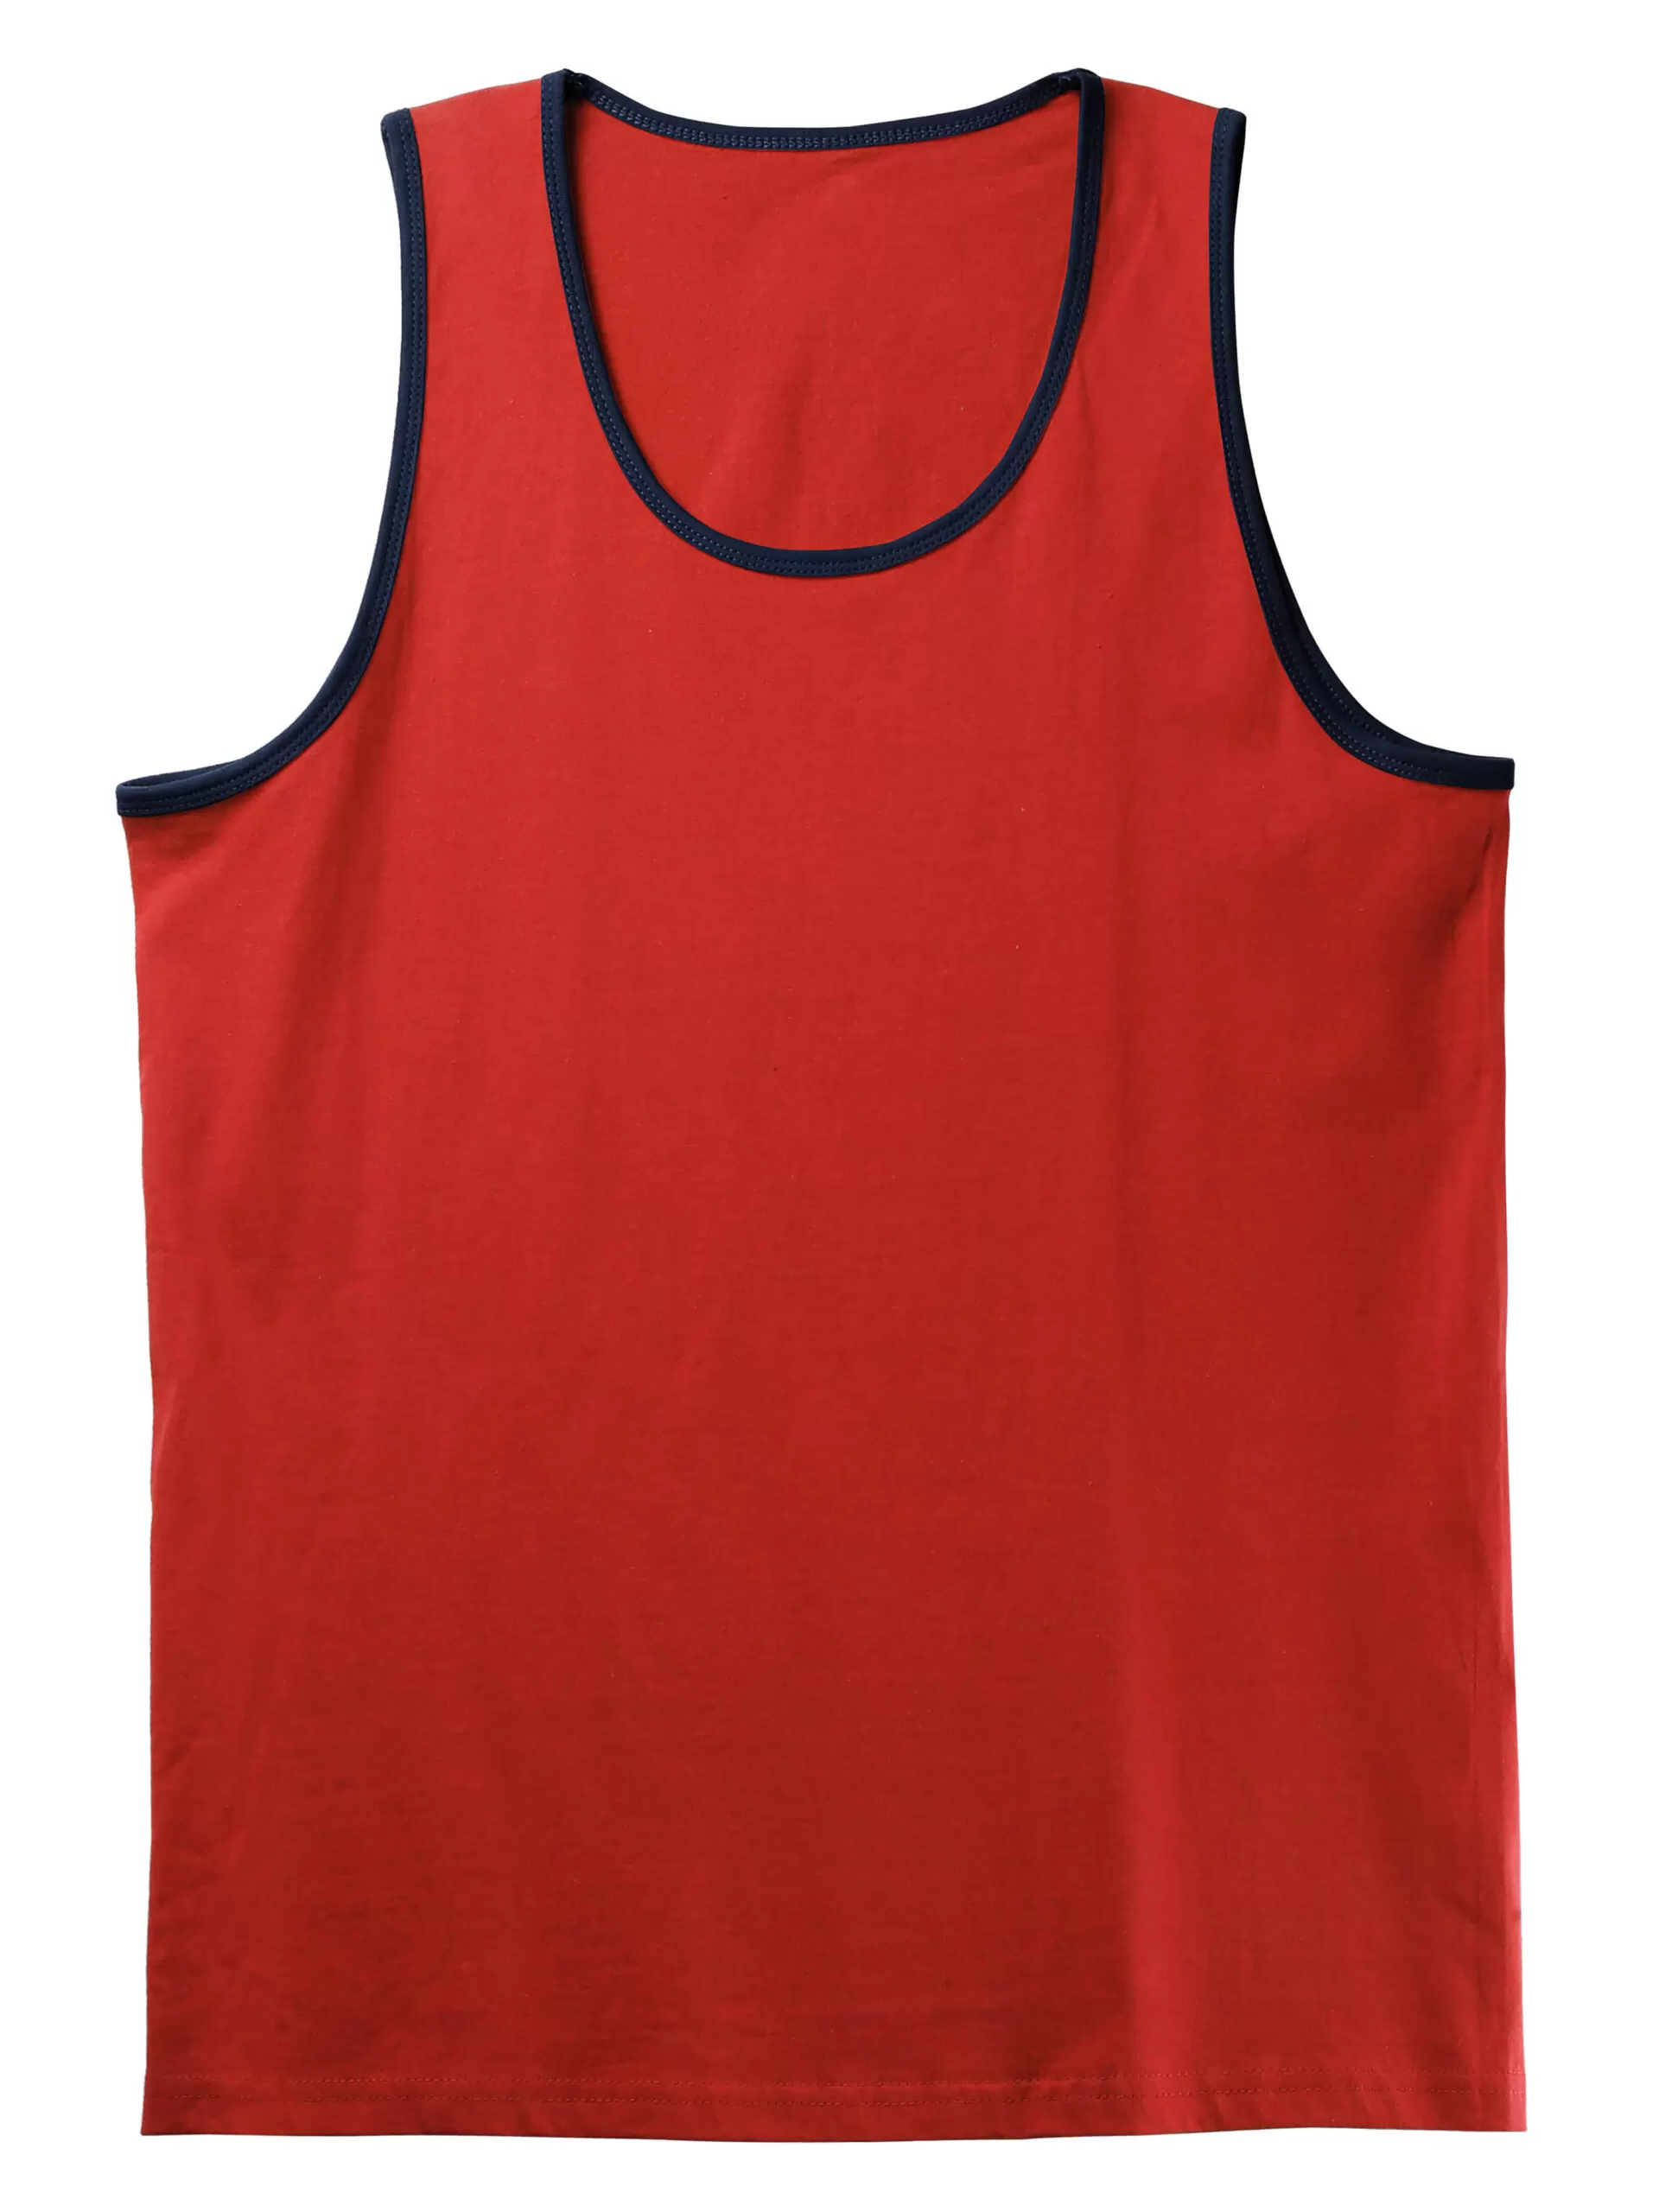 Bangladesh Wholesale Men's Classic Solid Tank Top Athletic Comfort Sleeveless T Shirts Supplier